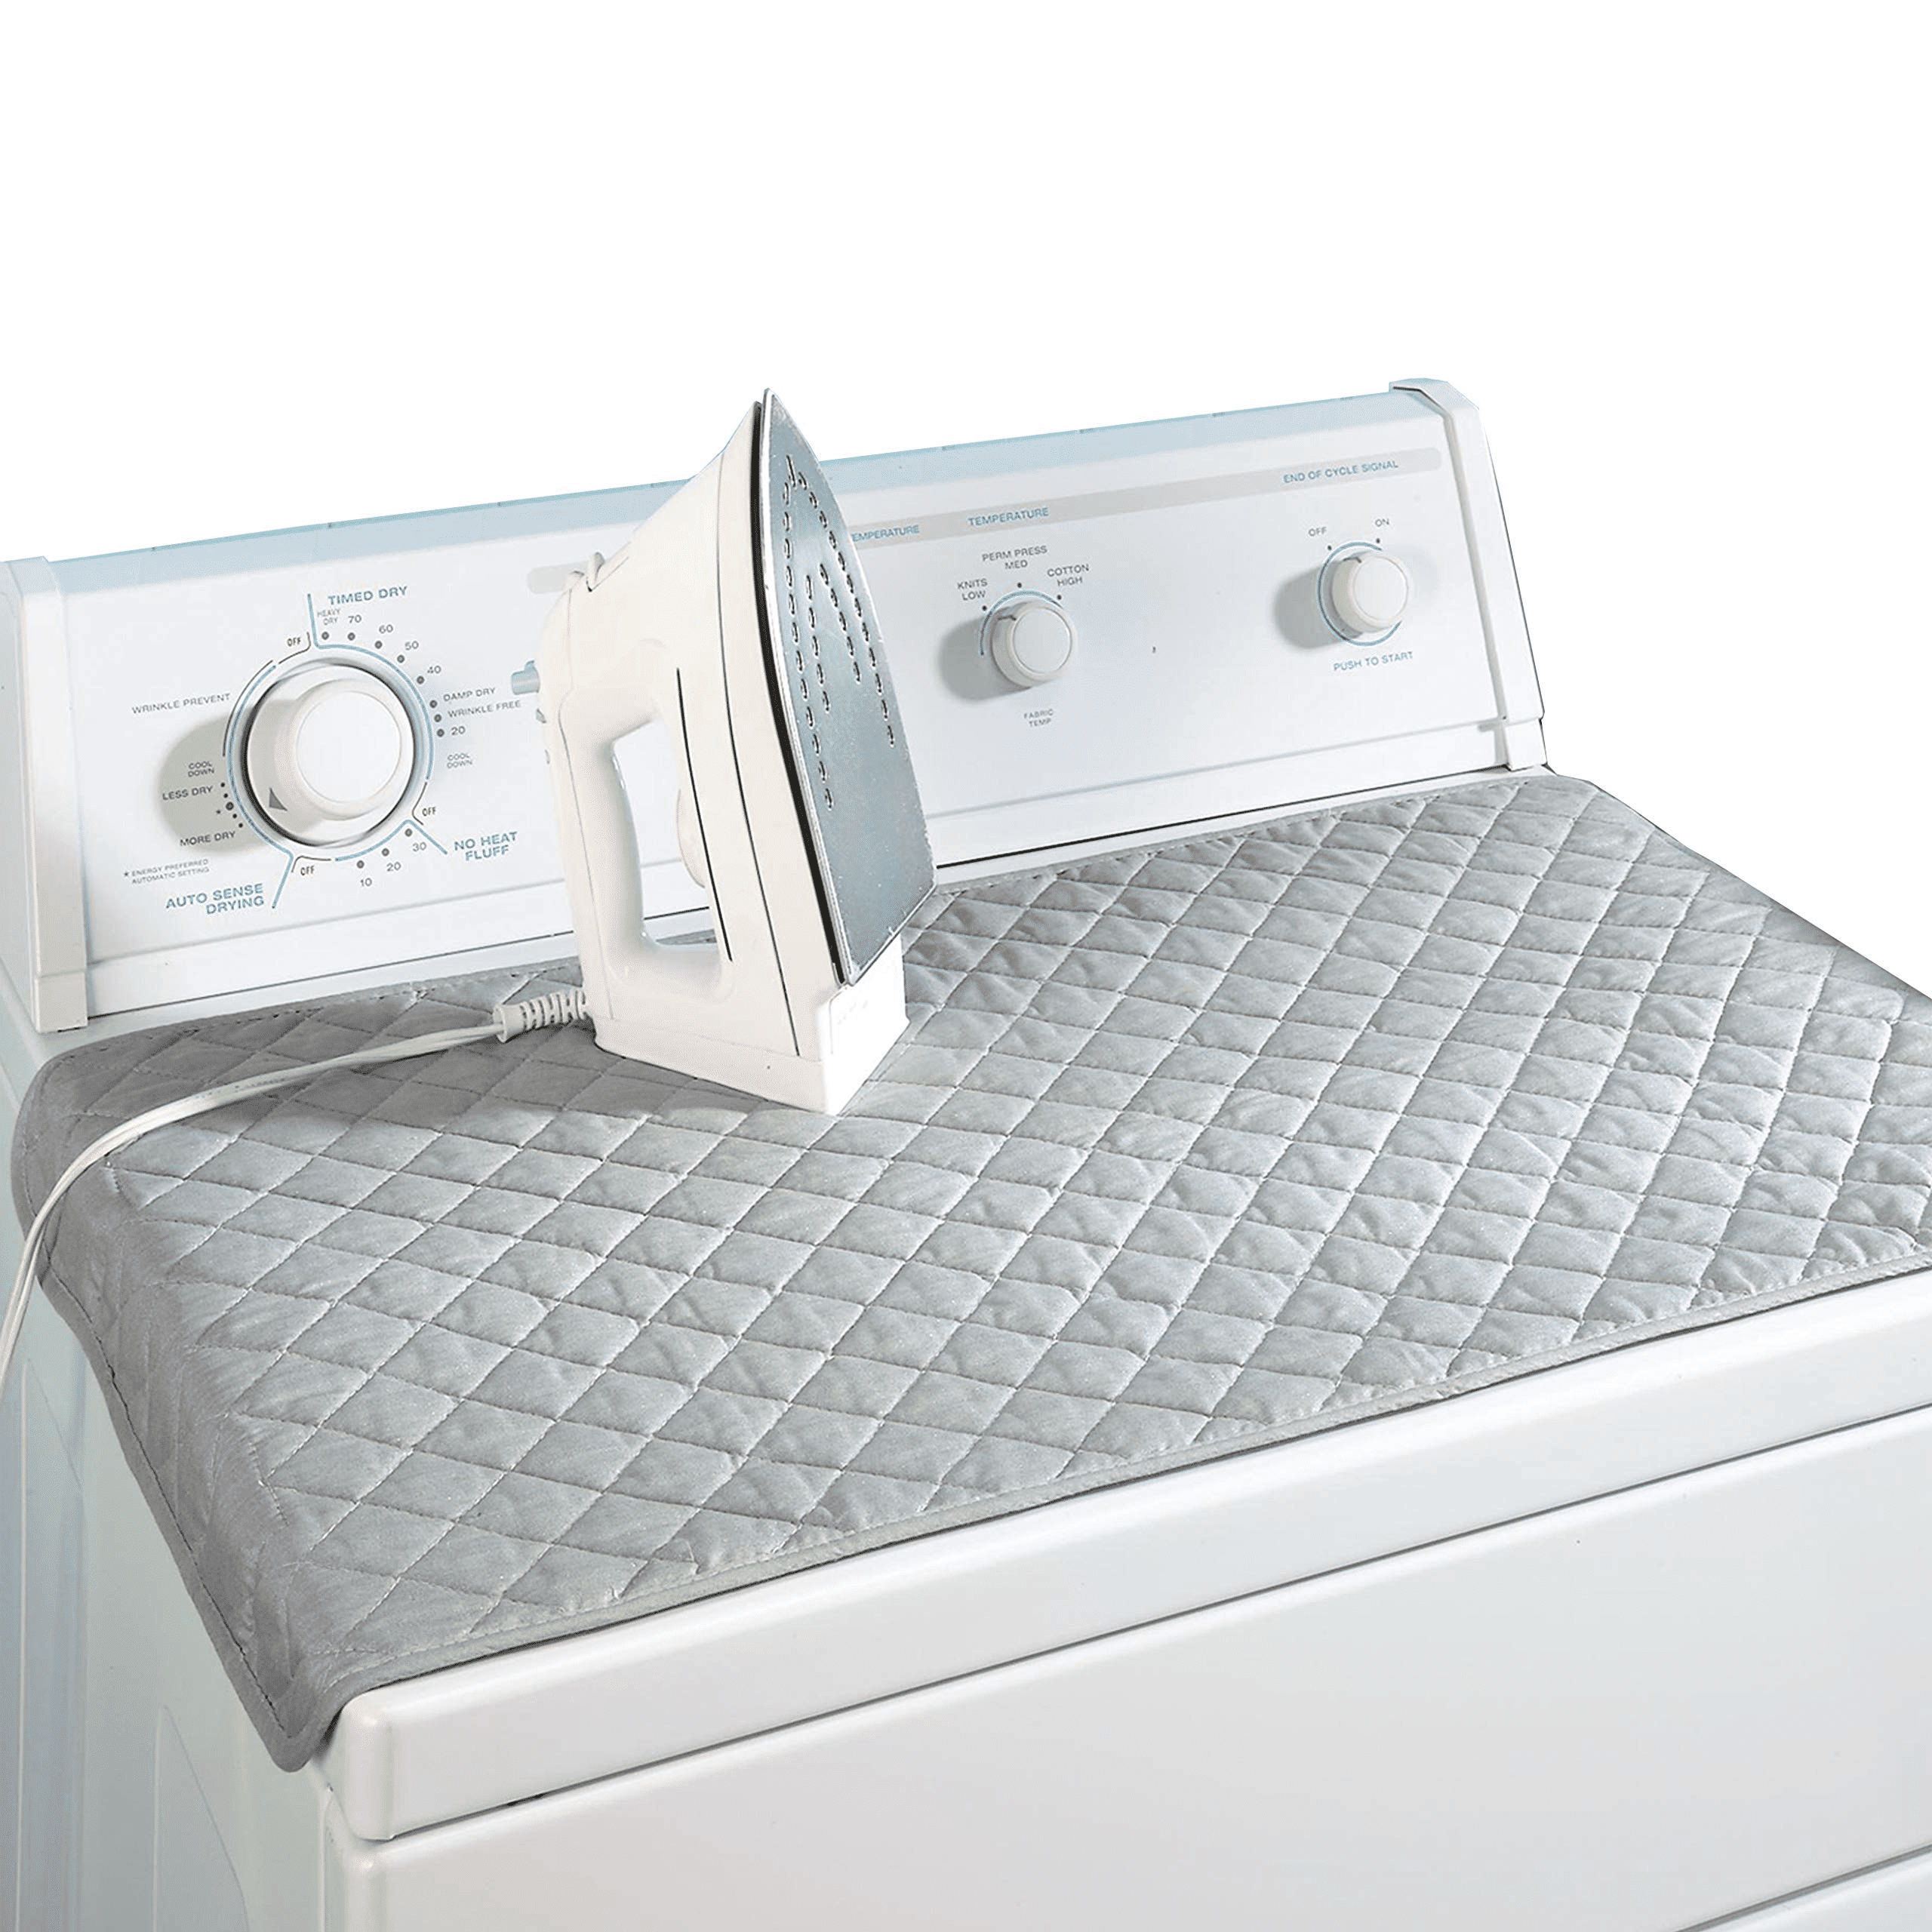 Ironing Blanket, Magnetic Mat Laundry Pad, 33x 18, Gray, Washer